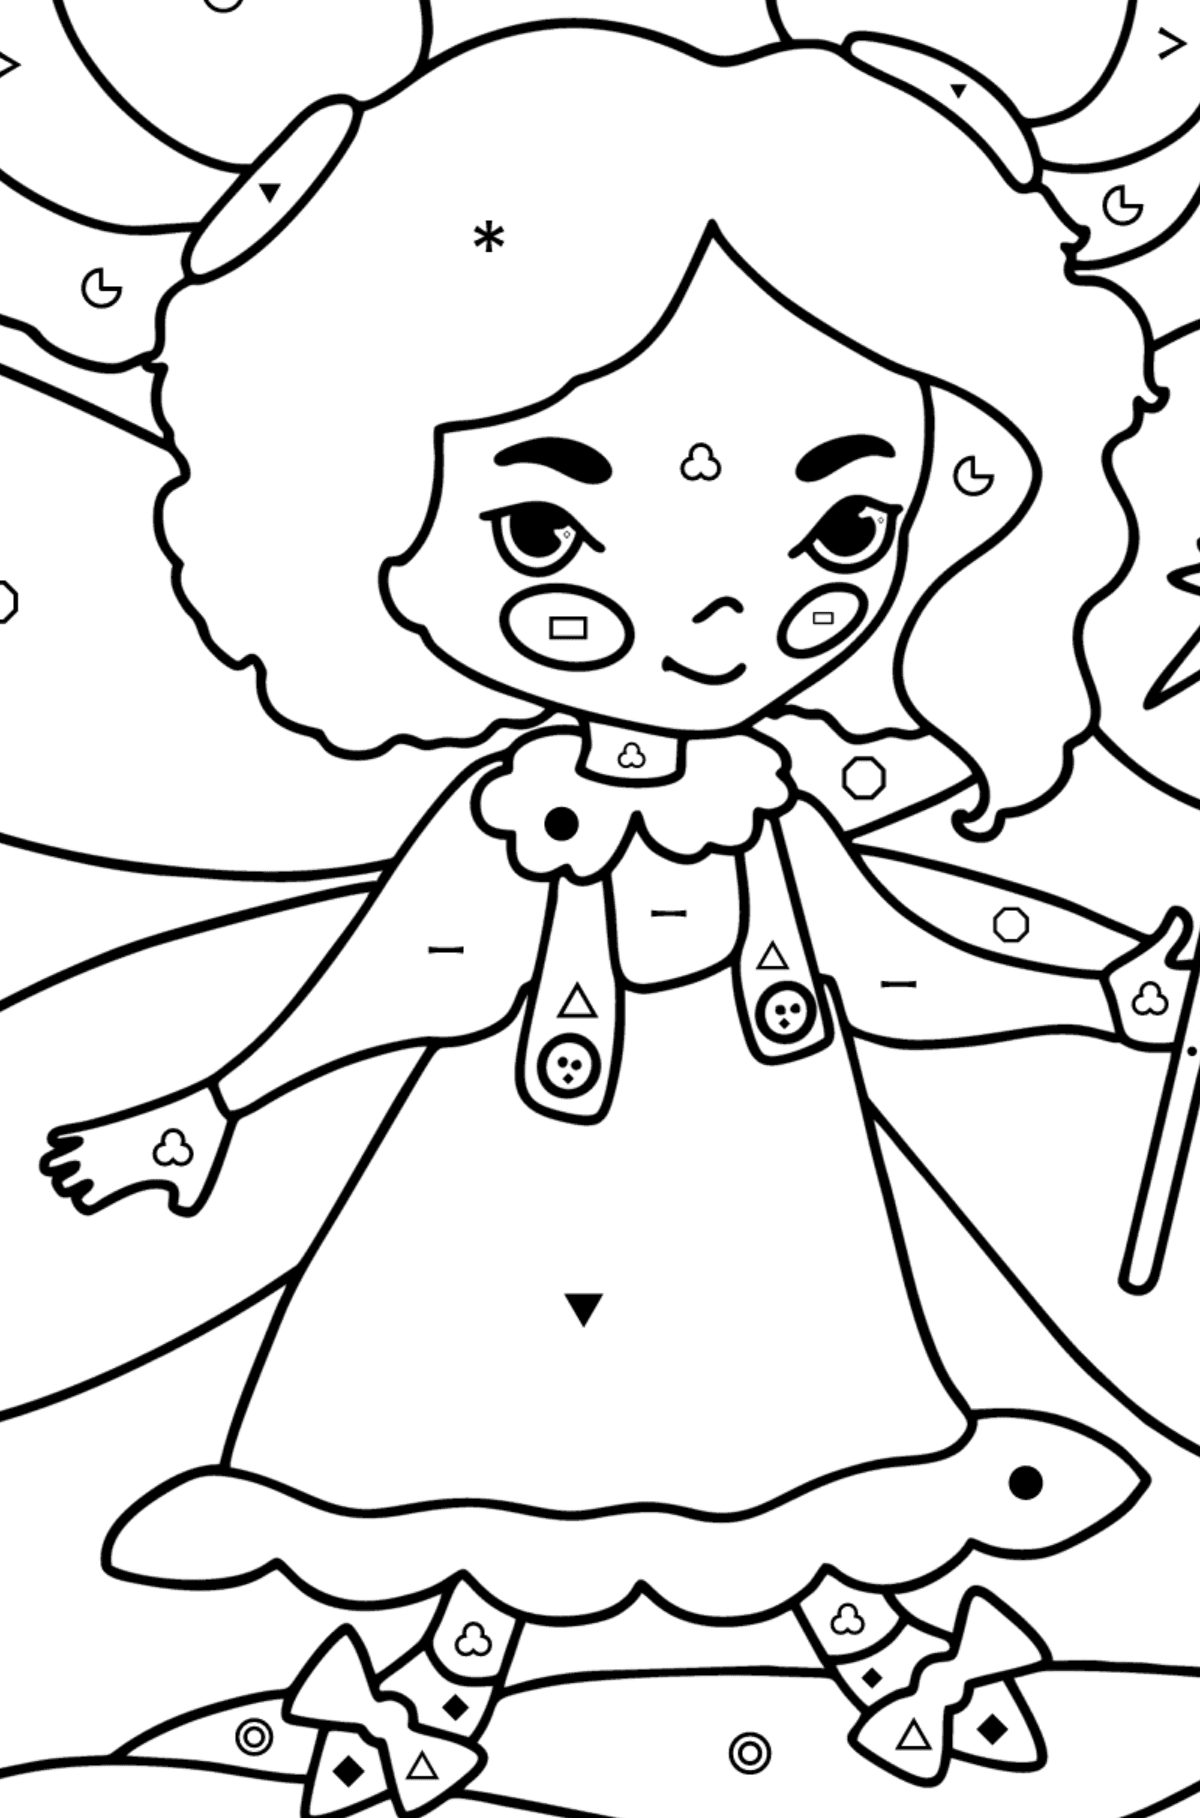 Fairy with a magic wand coloring page - Coloring by Symbols and Geometric Shapes for Kids